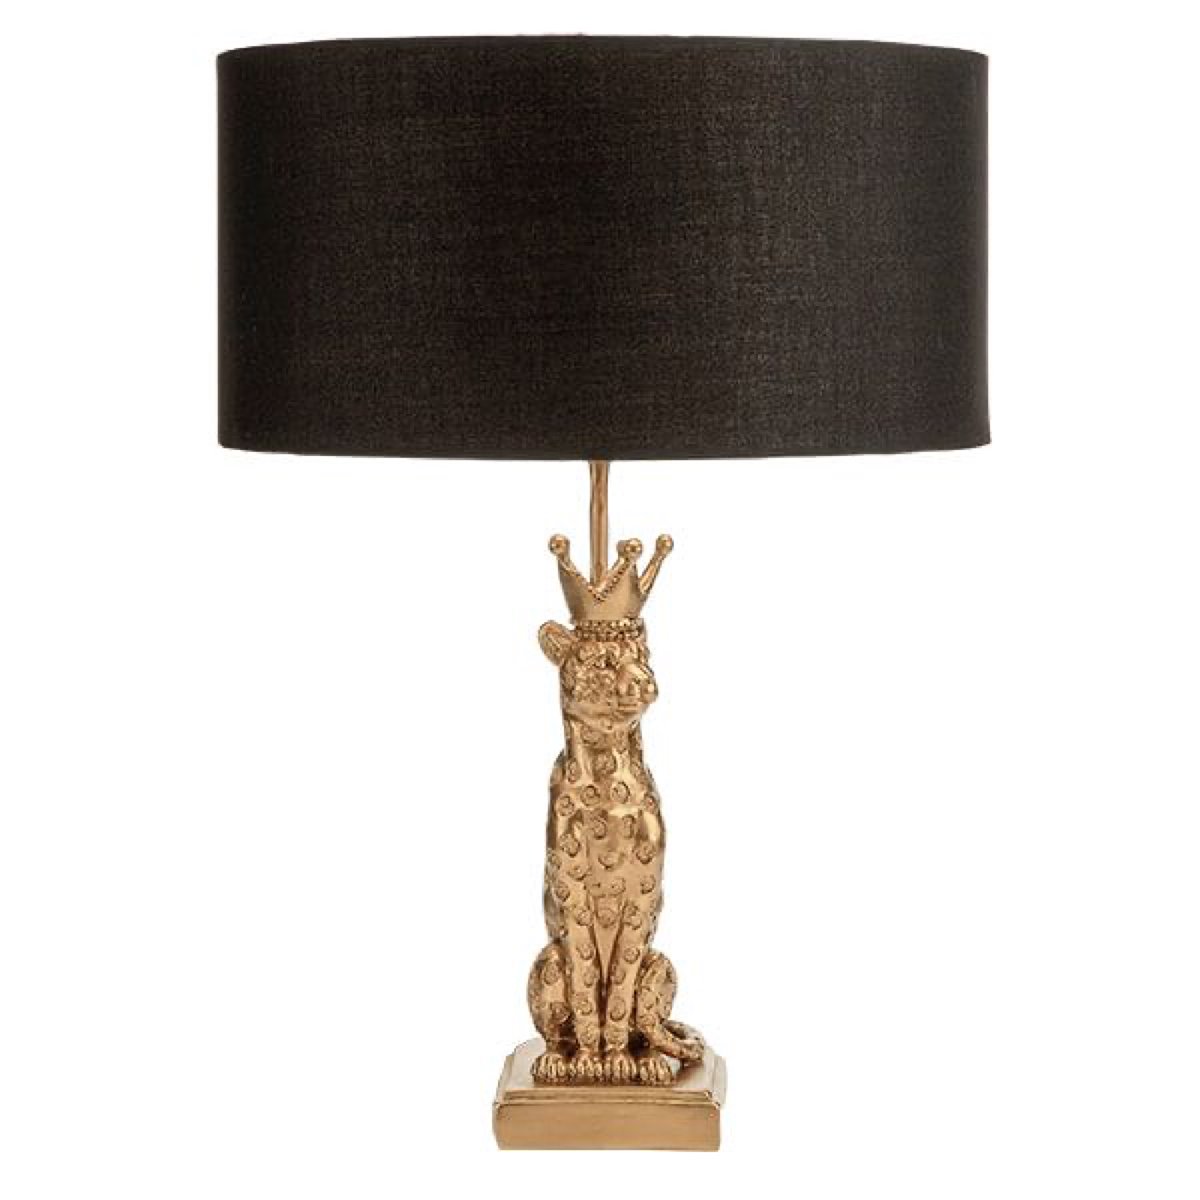 * Gold Leopard Lamp -- £79.95 *
👉 ooothatsnice.co.uk/gold-leopard-l… 🐆

Elevate the tone with this statement black and gold #leopard #tablelamp!

#leopardlamp #animaltheme #beautifulhome #lightingideas #interiordecor #samedaydispatch #ooothatsnice